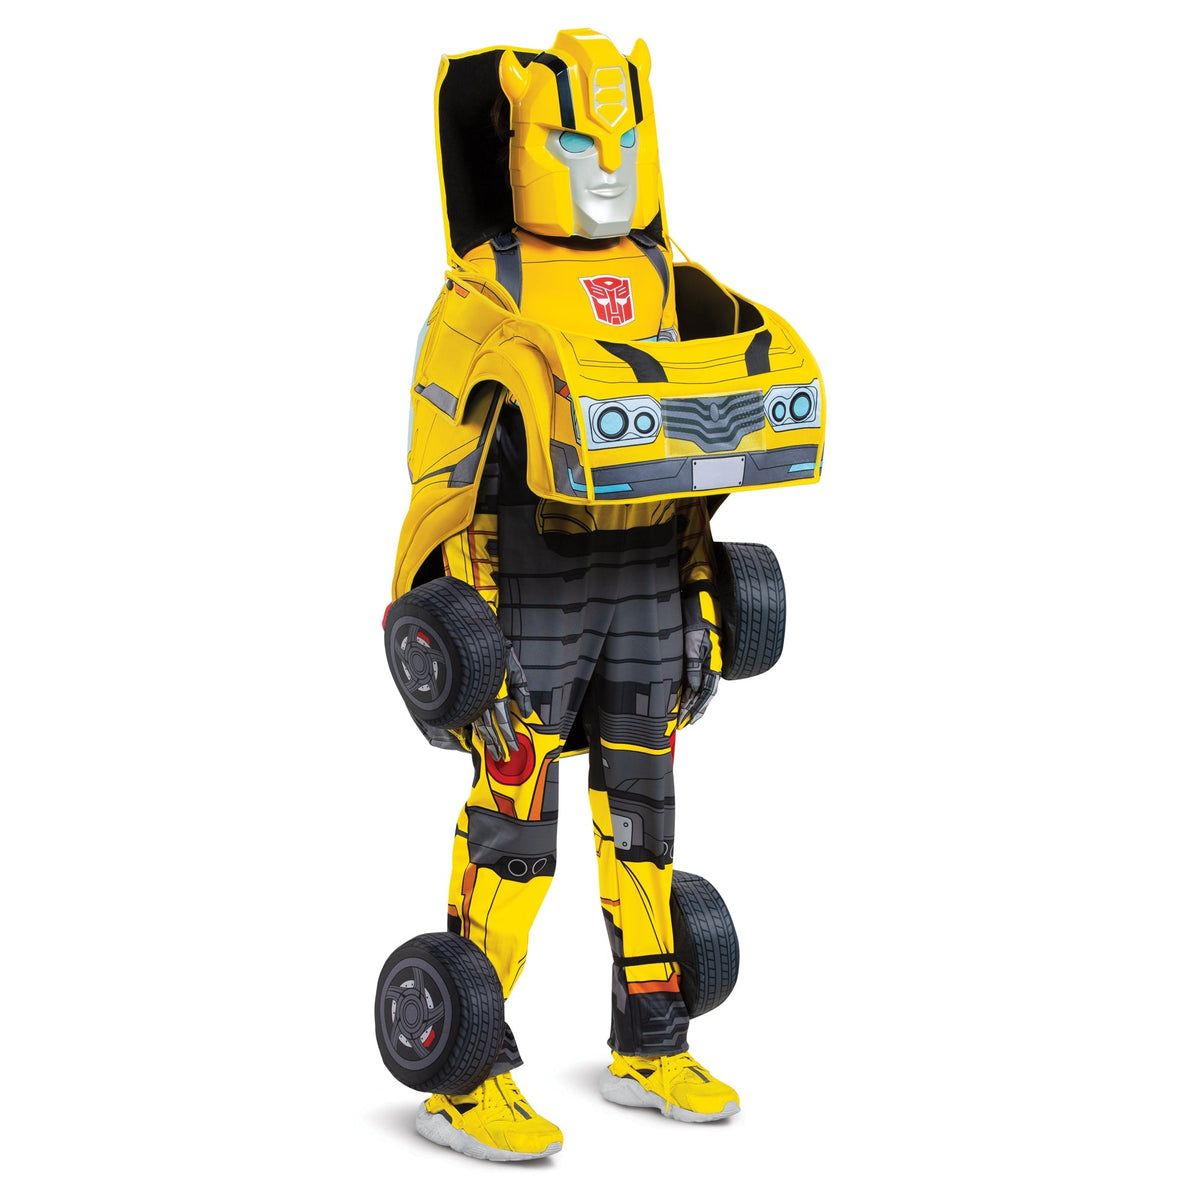 TOY-SPORT Costumes Transformers Bumblebee Convertible Costume for Kids